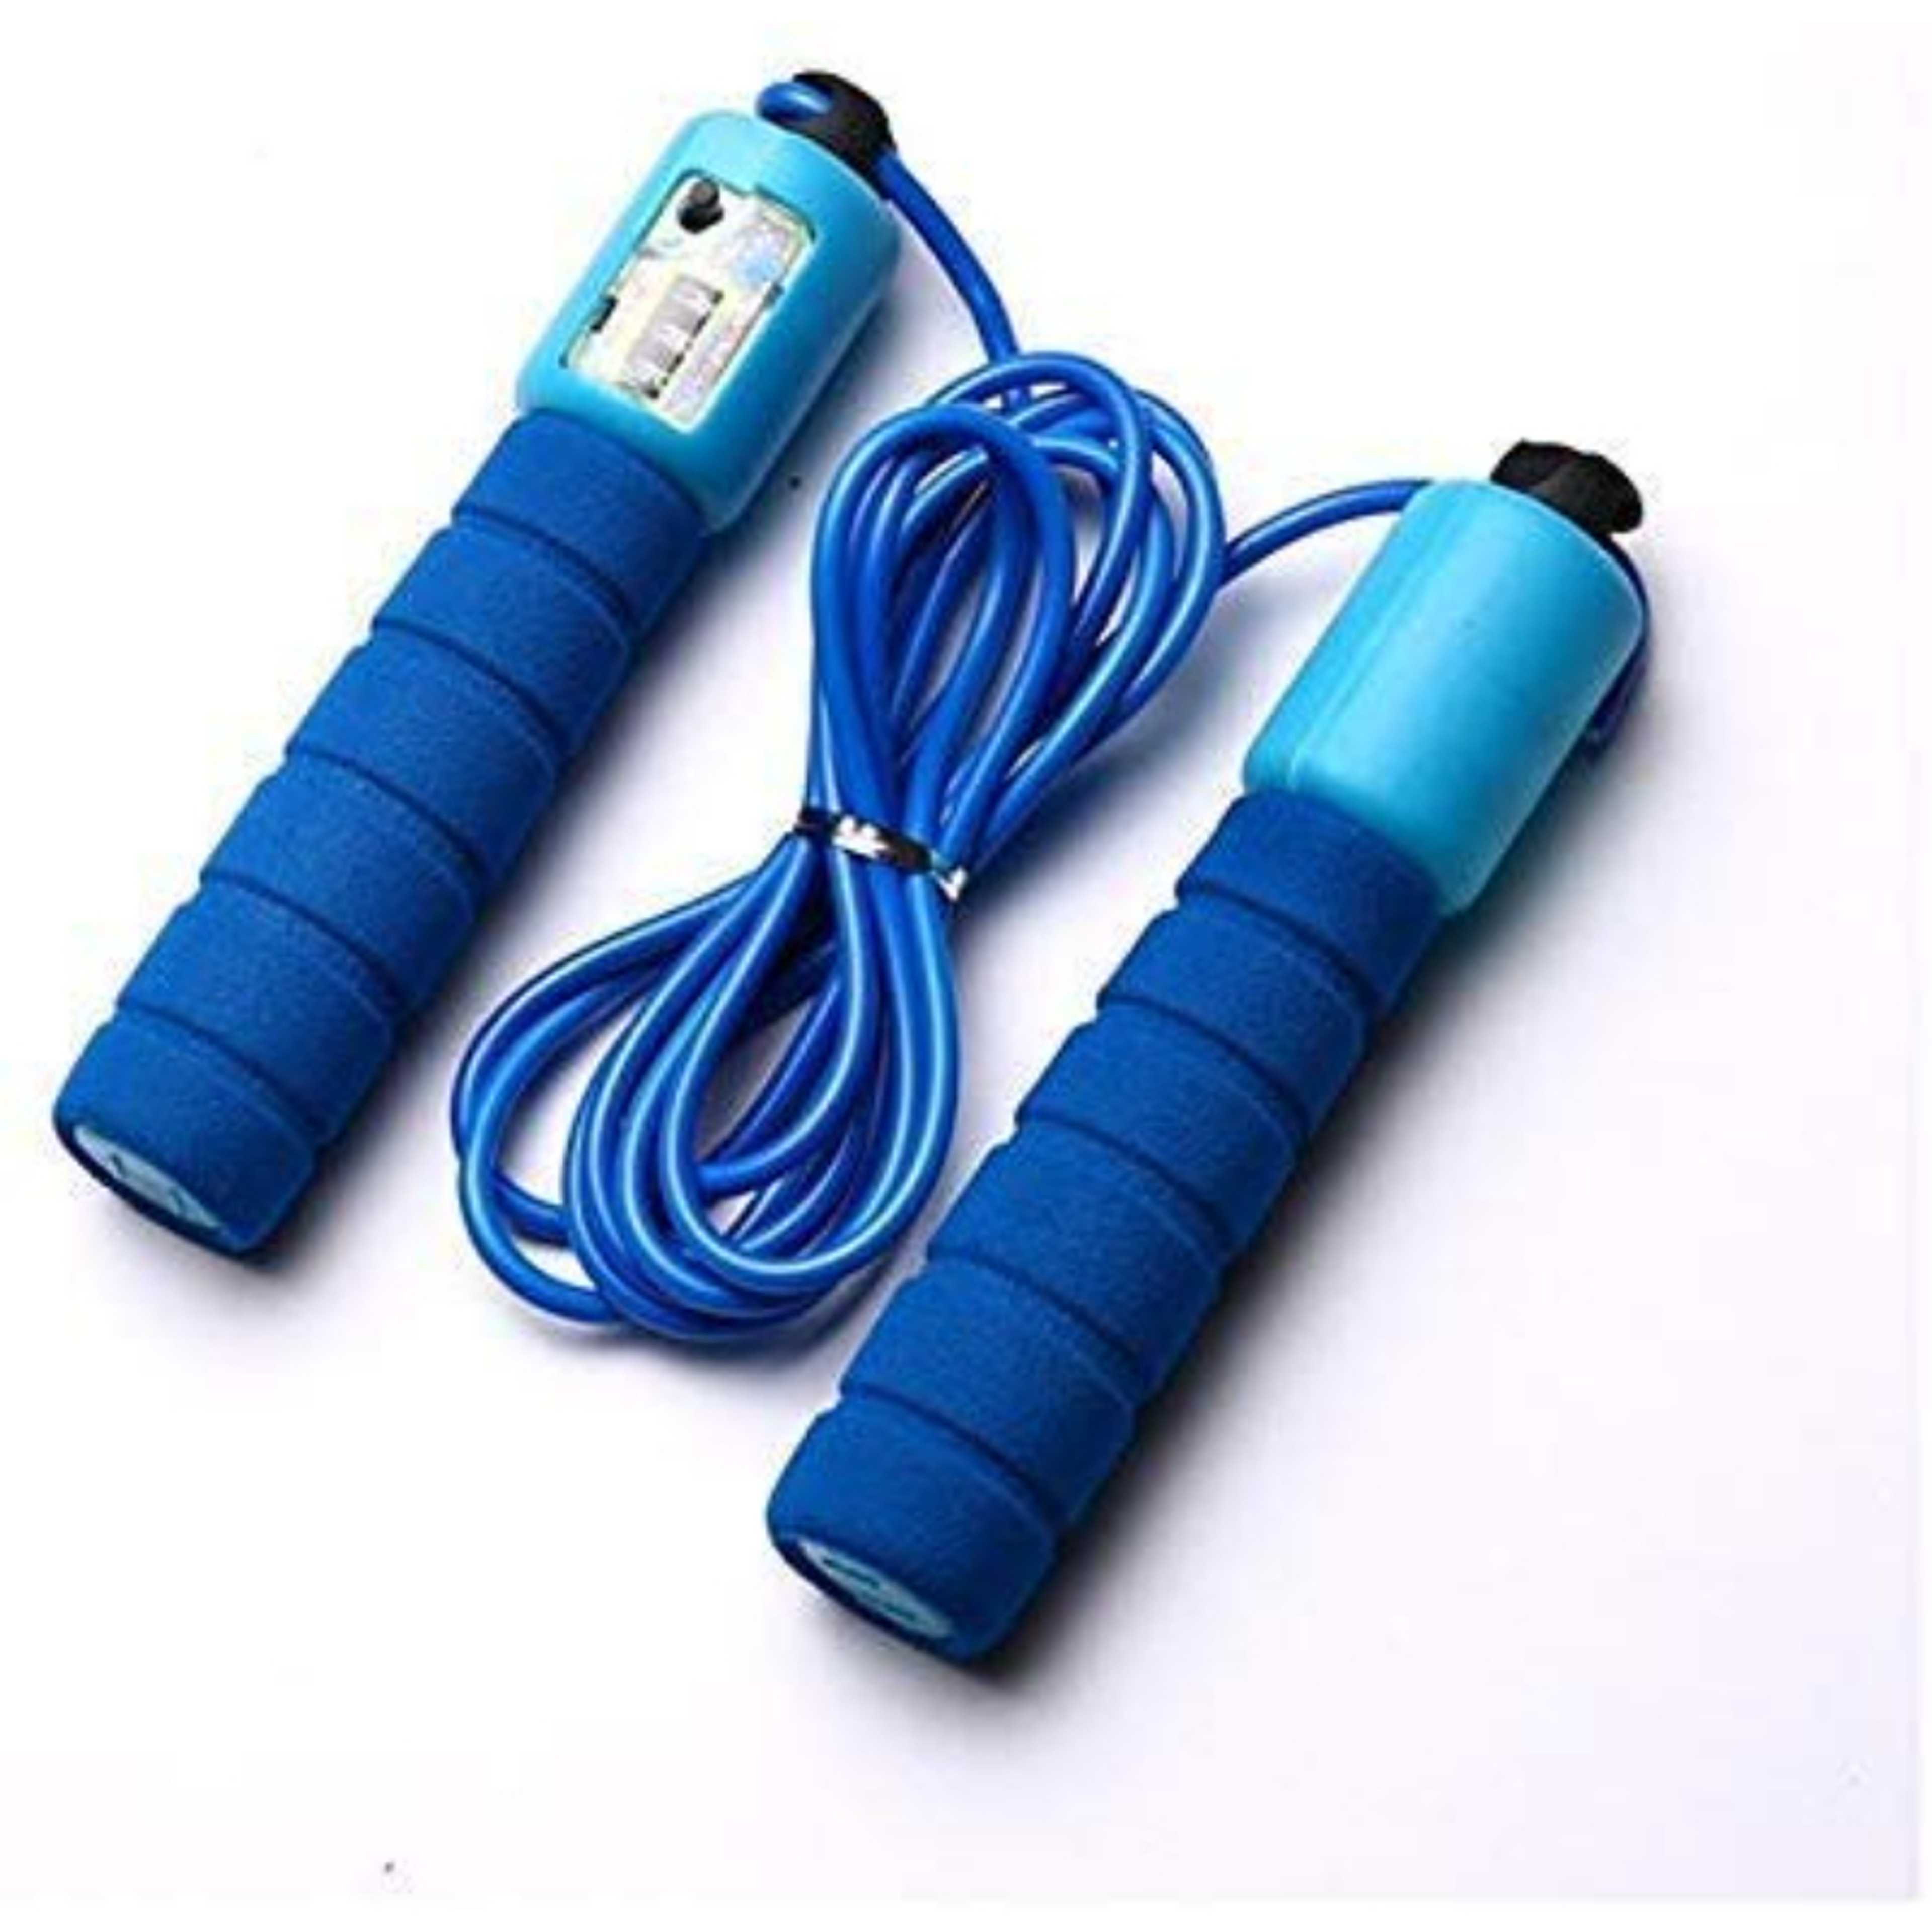 Top 1 Most Popular Counting Skipping jump Rope Multicolor